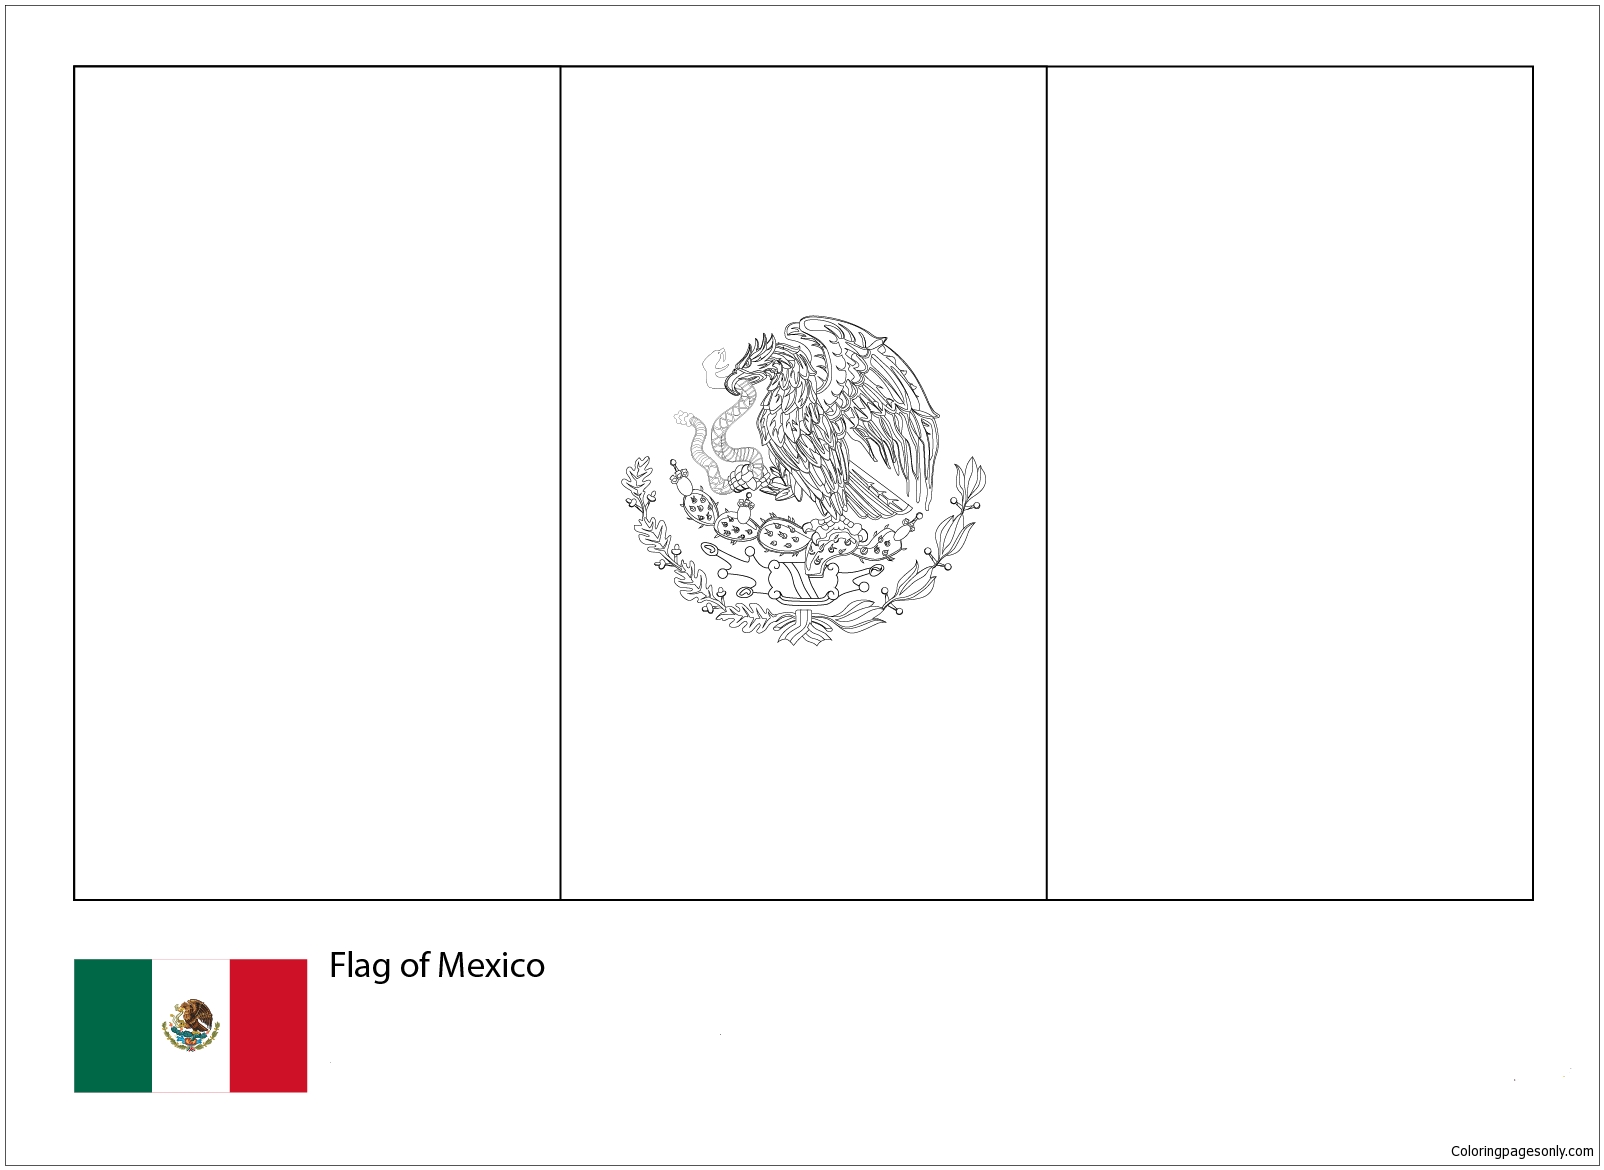 Flag of Mexico-World Cup 2018 from World Cup 2018 Flags